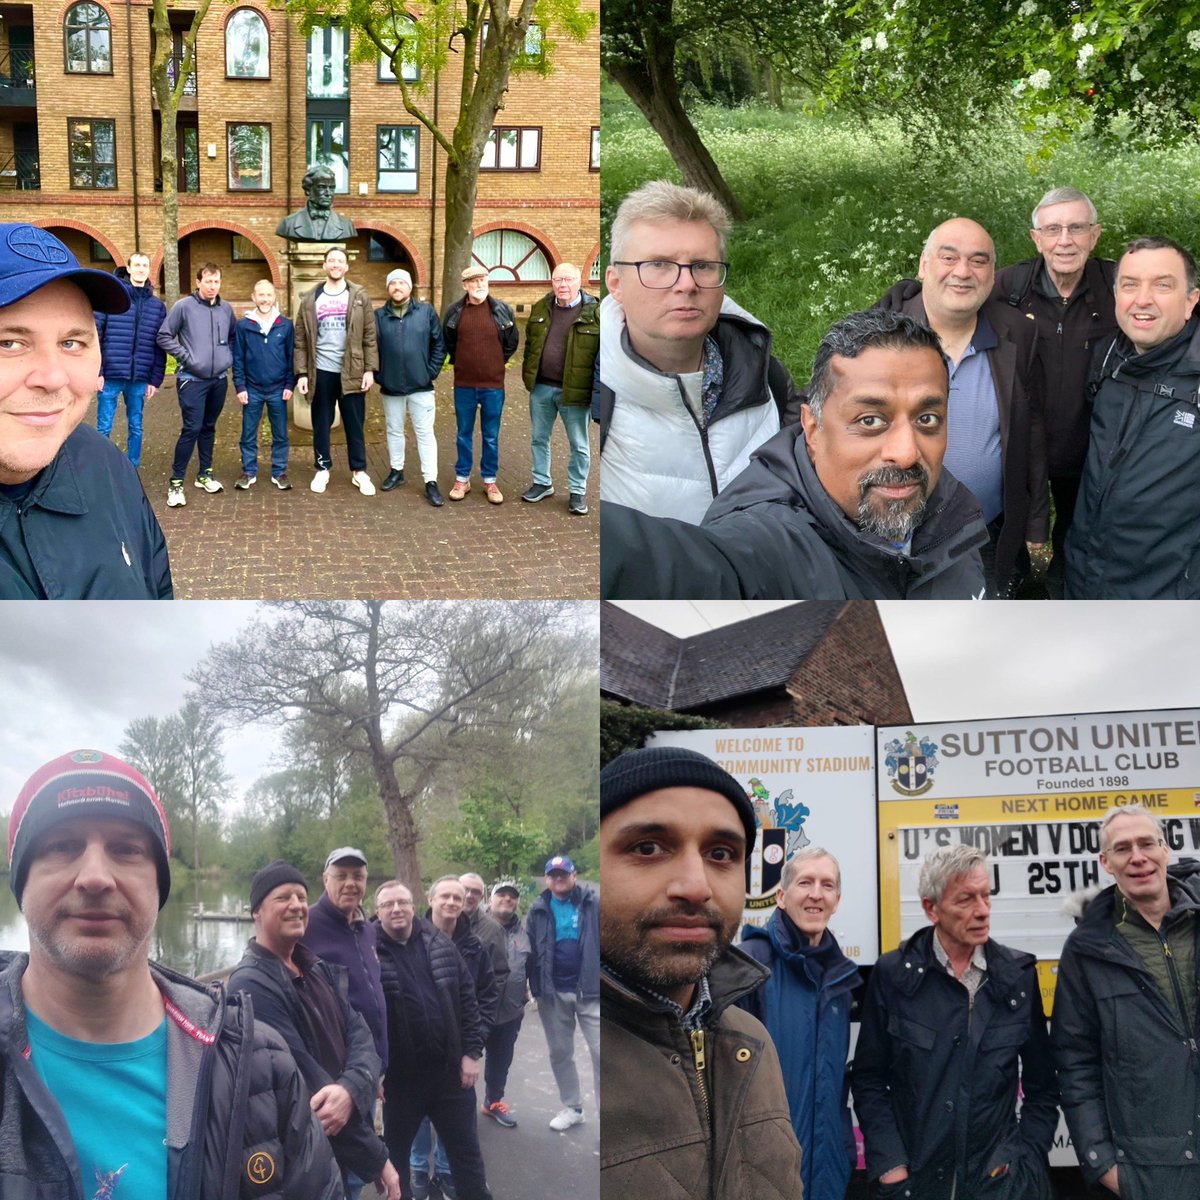 Four amazing walk and talks this evening Teams Southwark, Sutton, Rickmansworth and Redbridge All walking and most importantly talking this evening The support networks they have formed is great to see Message me direct or comment below for more information on how to join